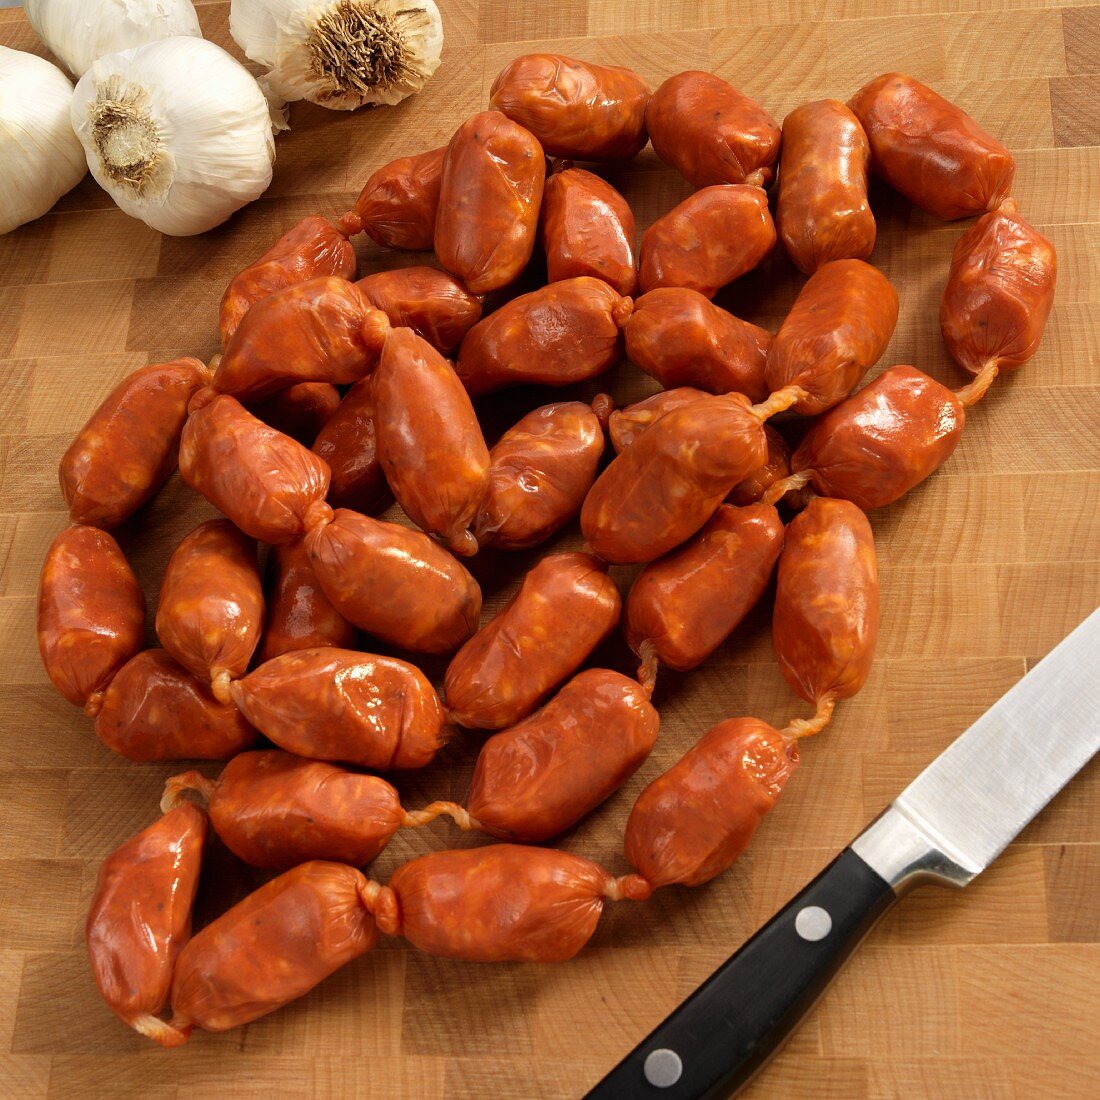 Spanish Spicy Small Link Sausages on a Cutting Board; Knife